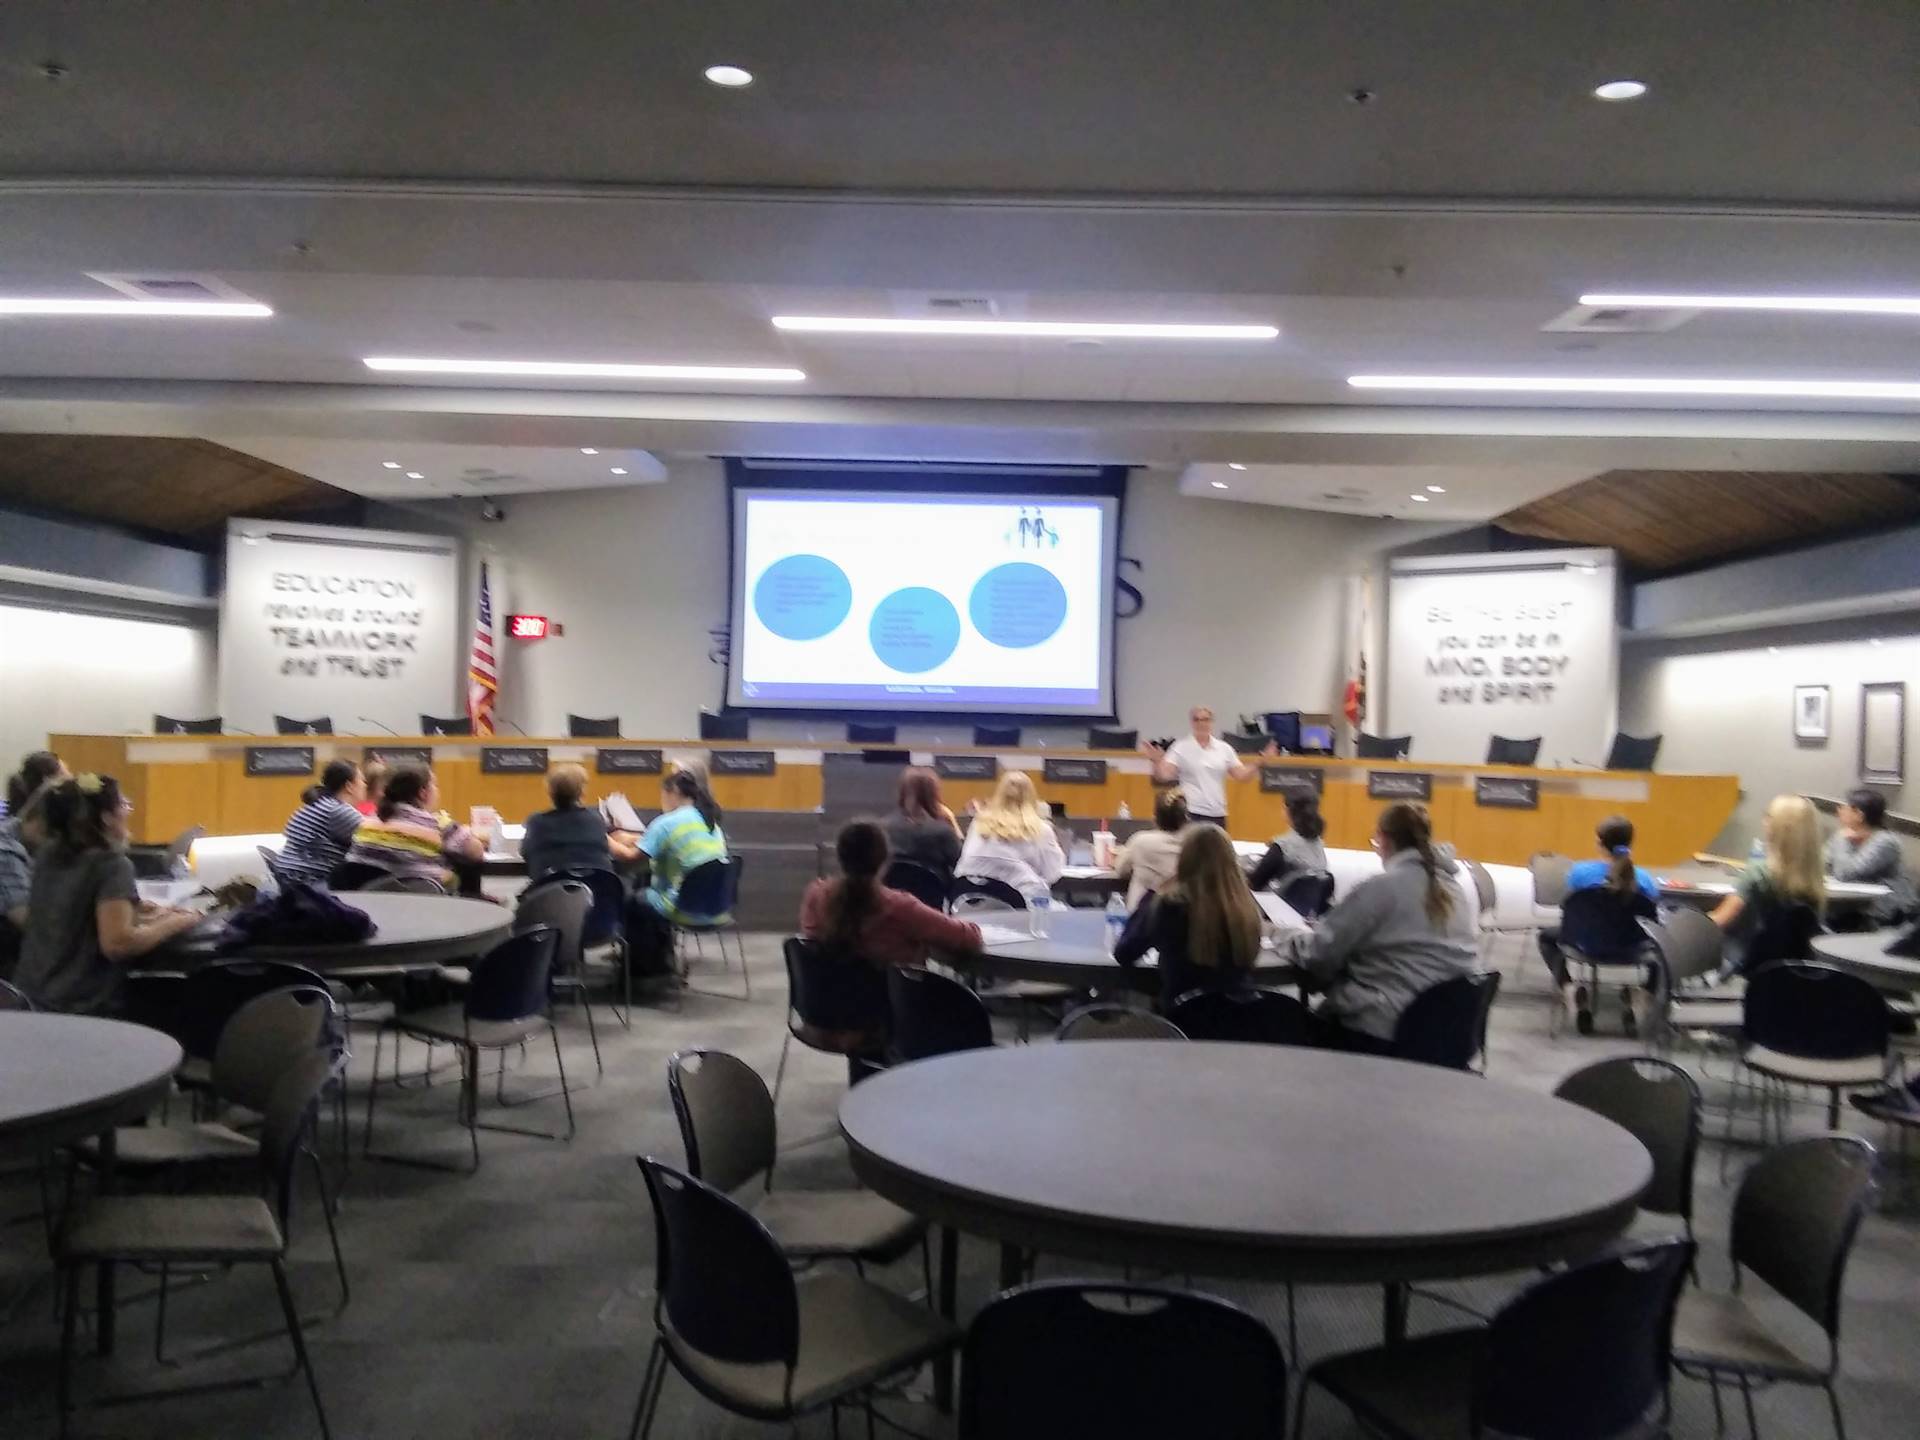 FRC workshop at CUSD boardroom gray round tables, projection screen and many people